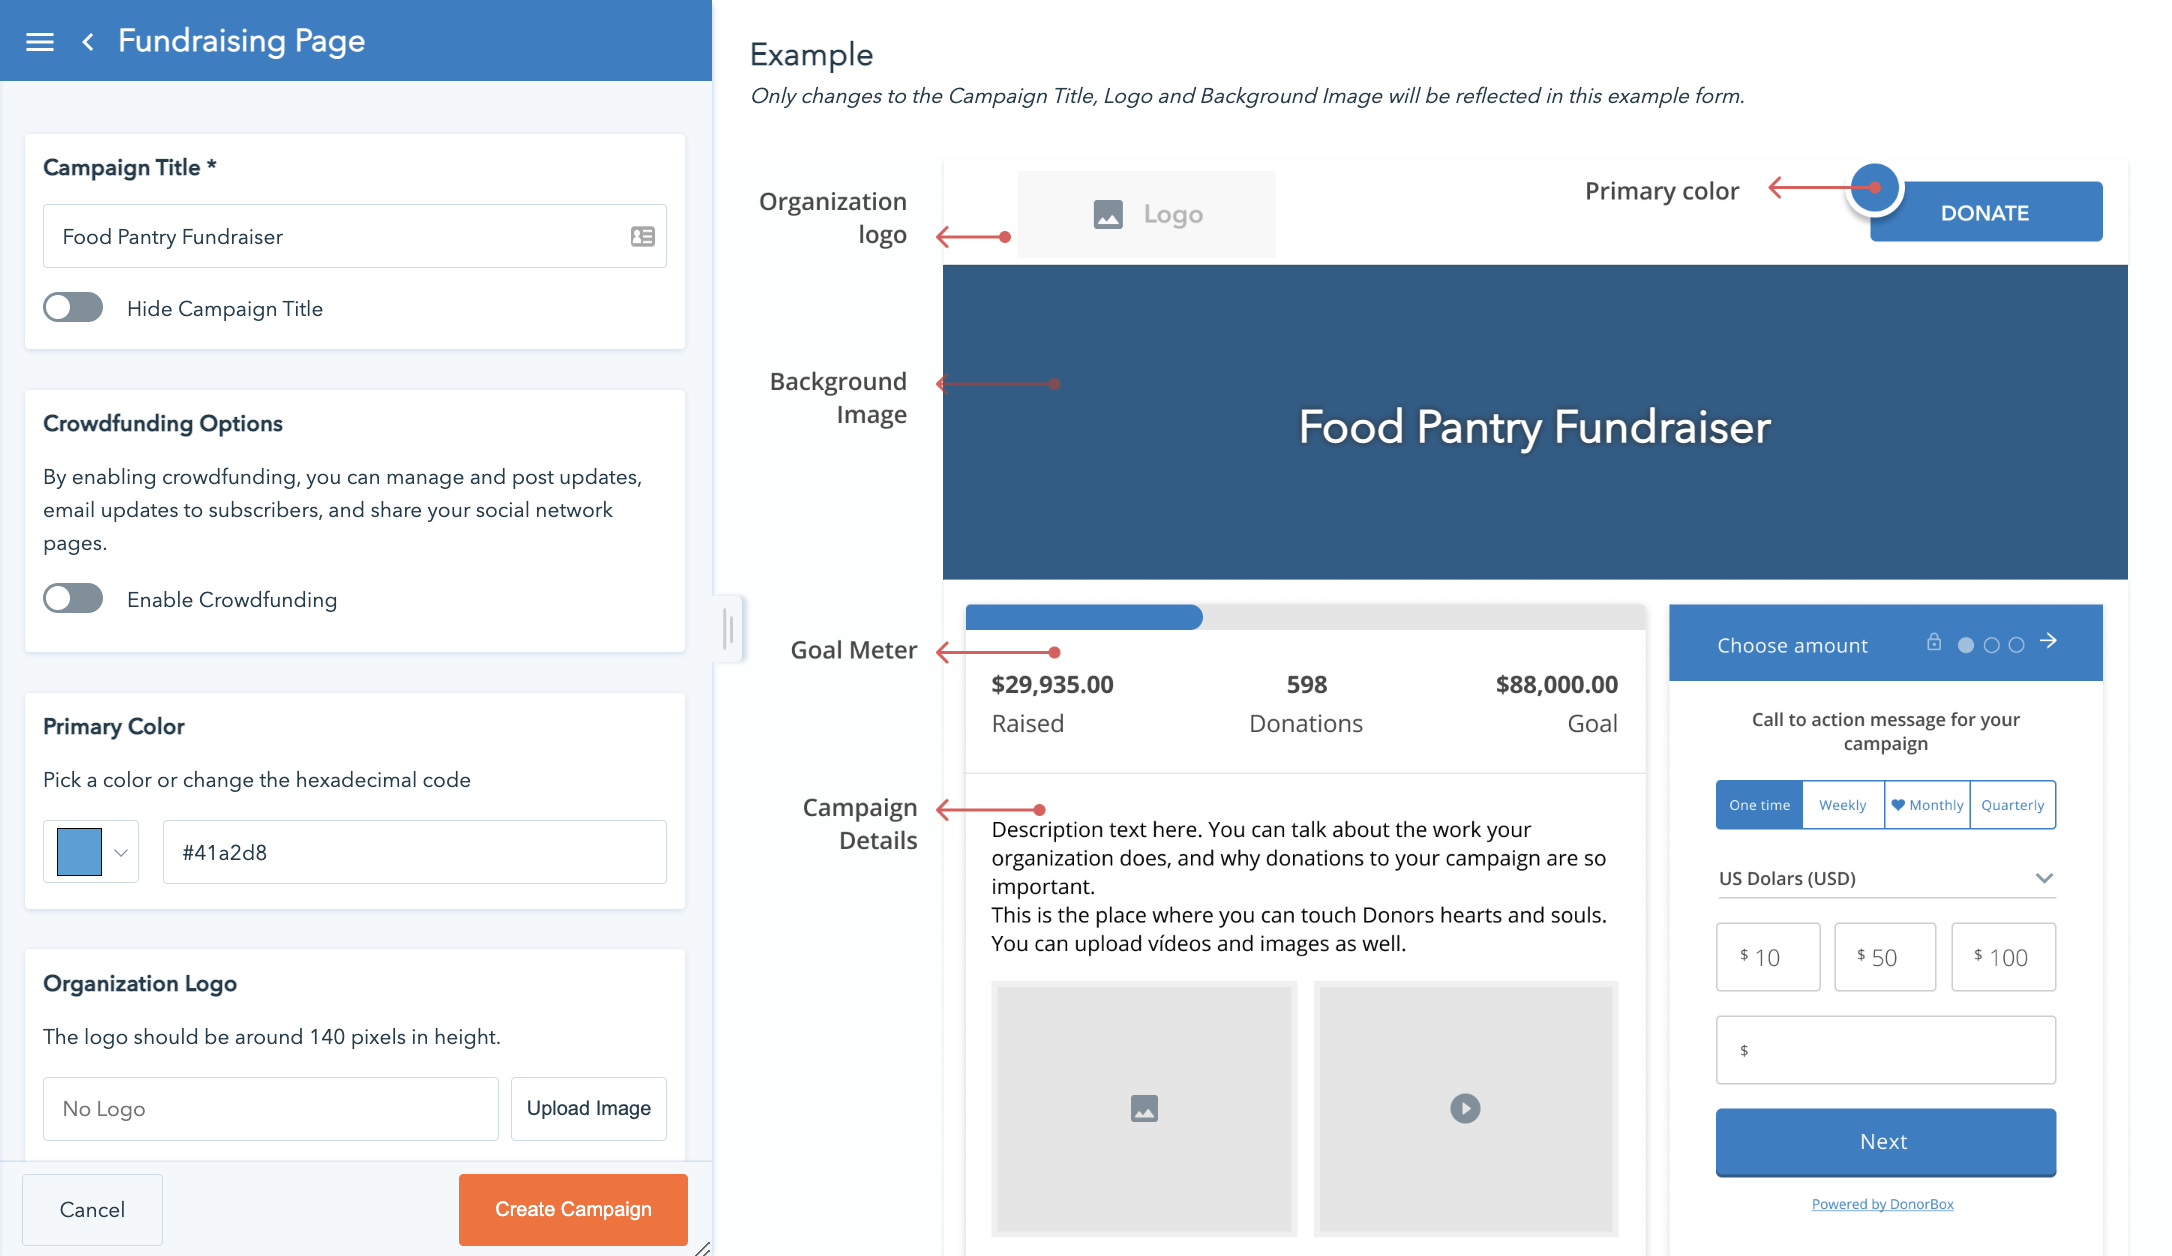 Example of the fundraising page editor in the Donorbox dashboard.